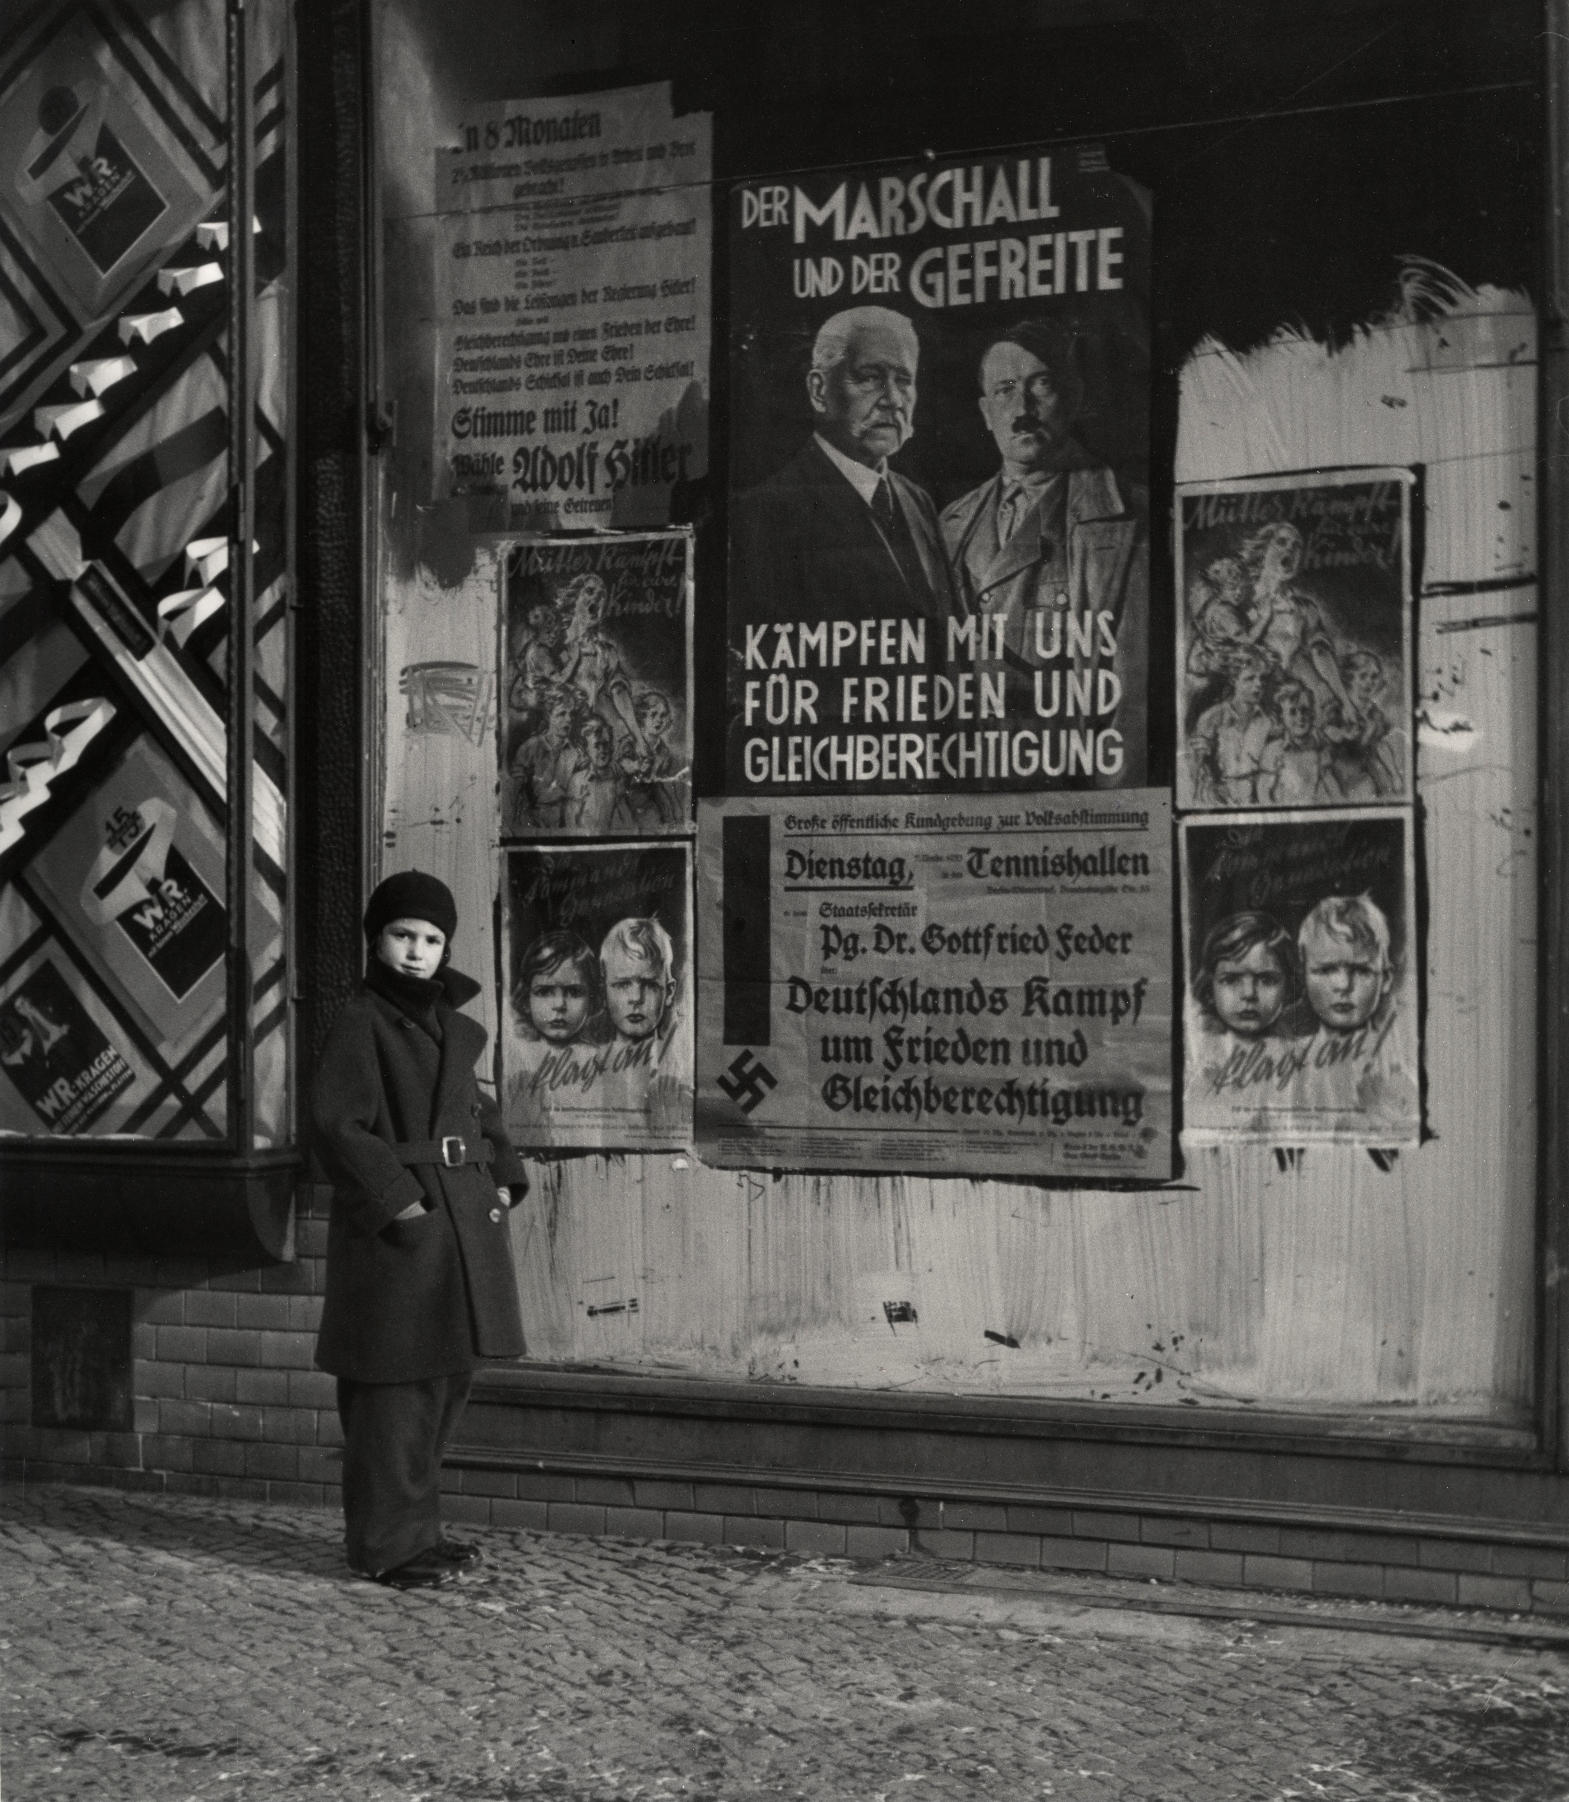 [Vishniac's daughter Mara posing in front of an election poster for Hindenburg and Hitler that reads „The Marshal and the Corporal: Fight with Us for Peace and Equal Rights” Wilmersdorf, Berlin], 1933. © Mara Vishniac Kohn, courtesy International Center of Photography (źródło: dzięki uprzejmości International Center of Photography w Nowym Jorku)